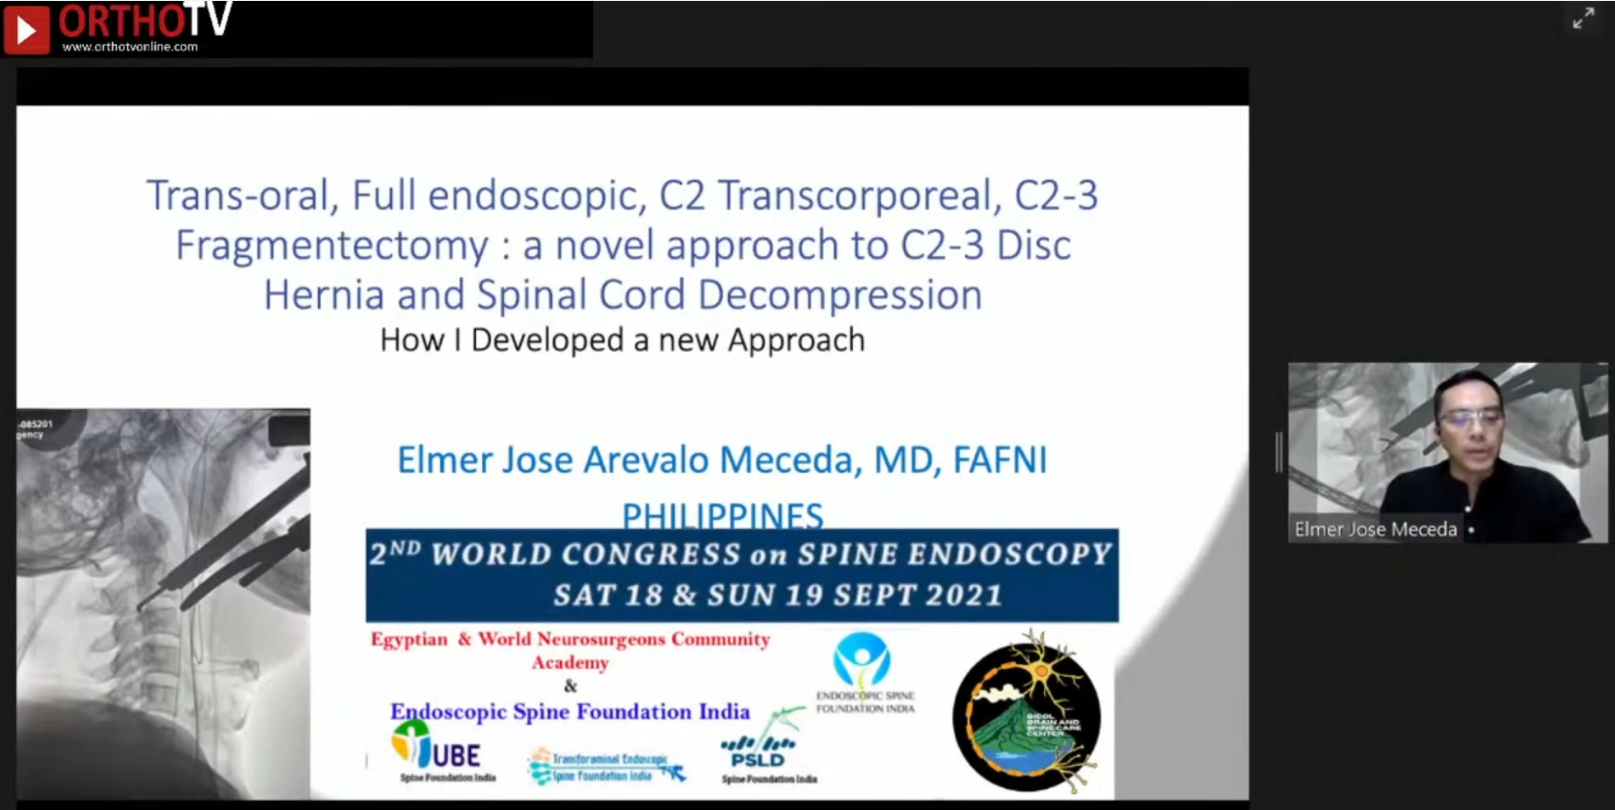 Teans-Oral, Full Endoscopic, C2 Transcorporeal, C2-3 Fragmentectomy: A Navel Approach C2-3 Disc Hernia and Spinal Cord Decompression How I developed and new Approach ? Dr Elmer Jose Arevalo Meceda MD FAFNI, Phillippines